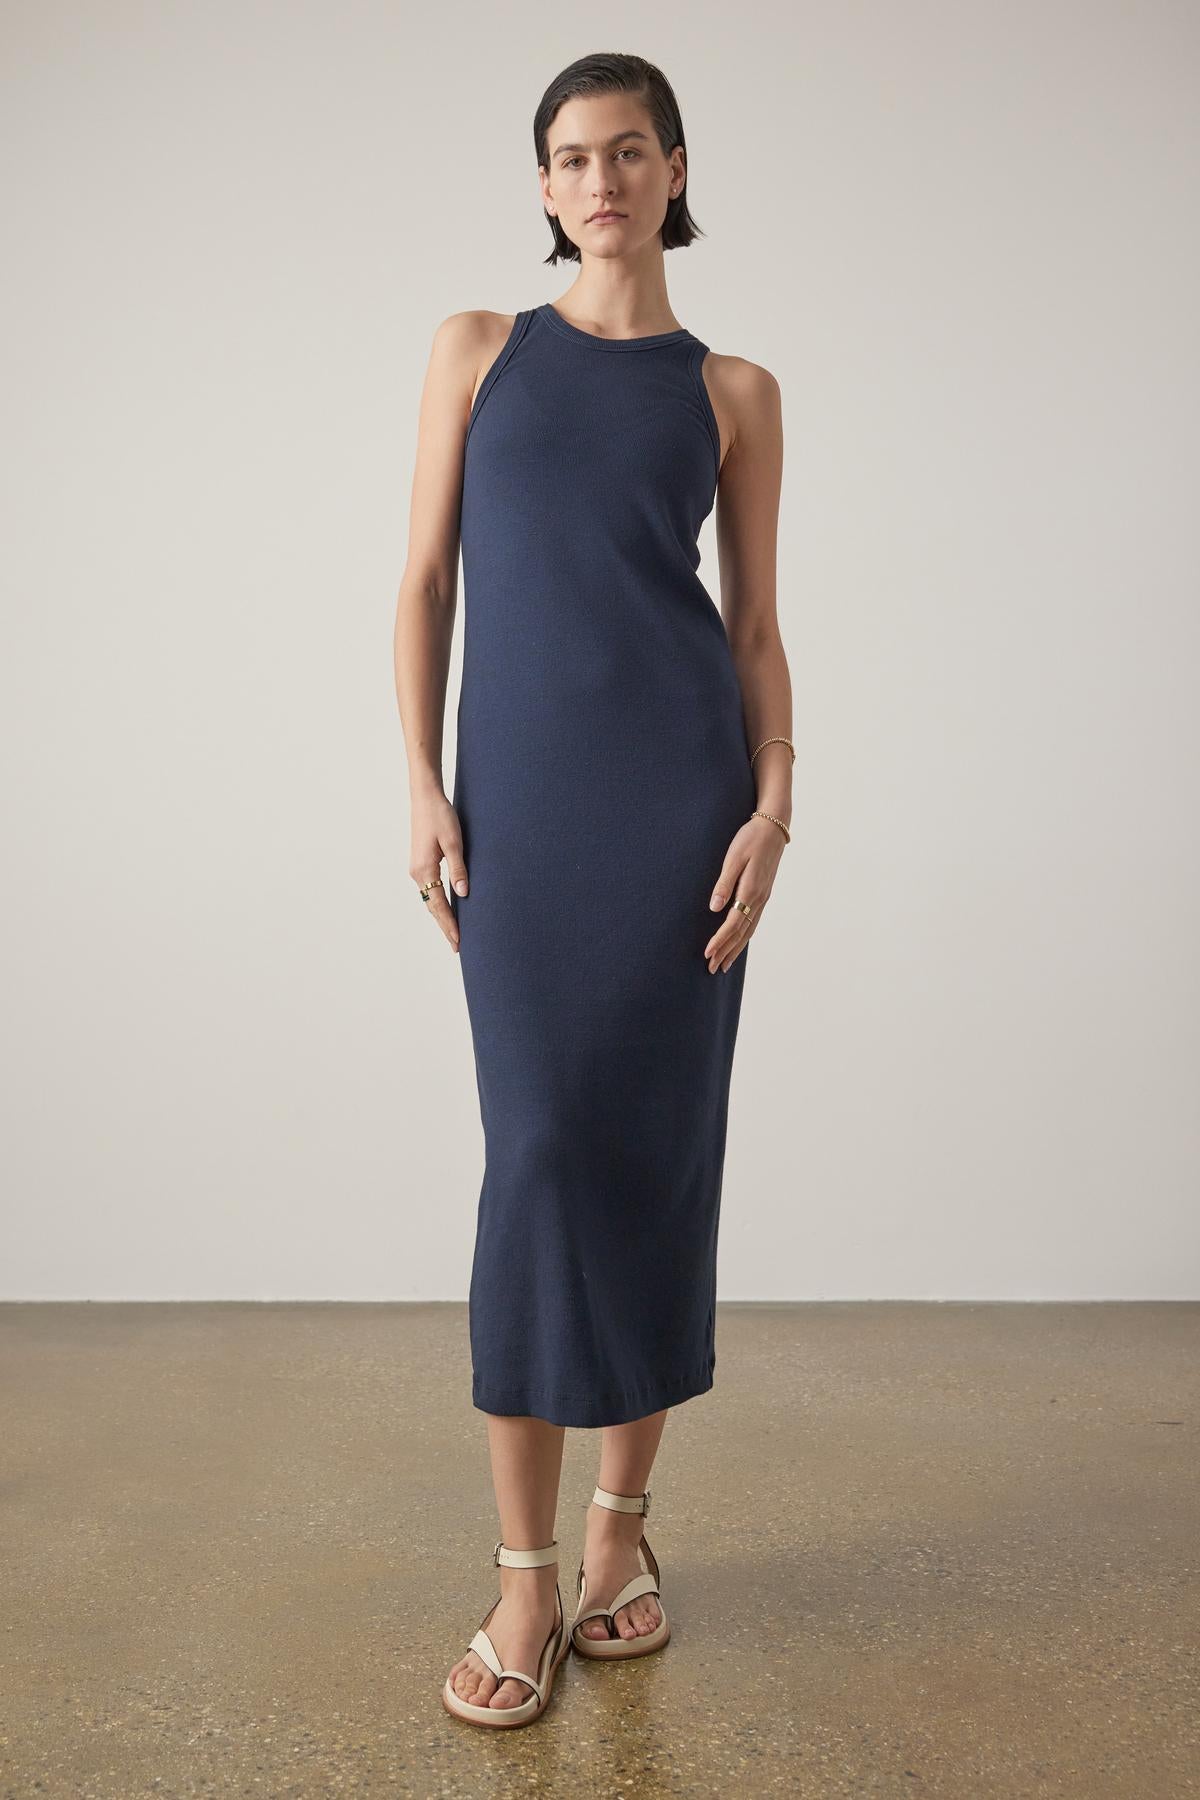 A woman in a Griffith dress by Velvet by Jenny Graham, a navy blue sleeveless midi dress with a crew neckline, stands in a neutral studio setting, paired with beige sandals.-36863292637377